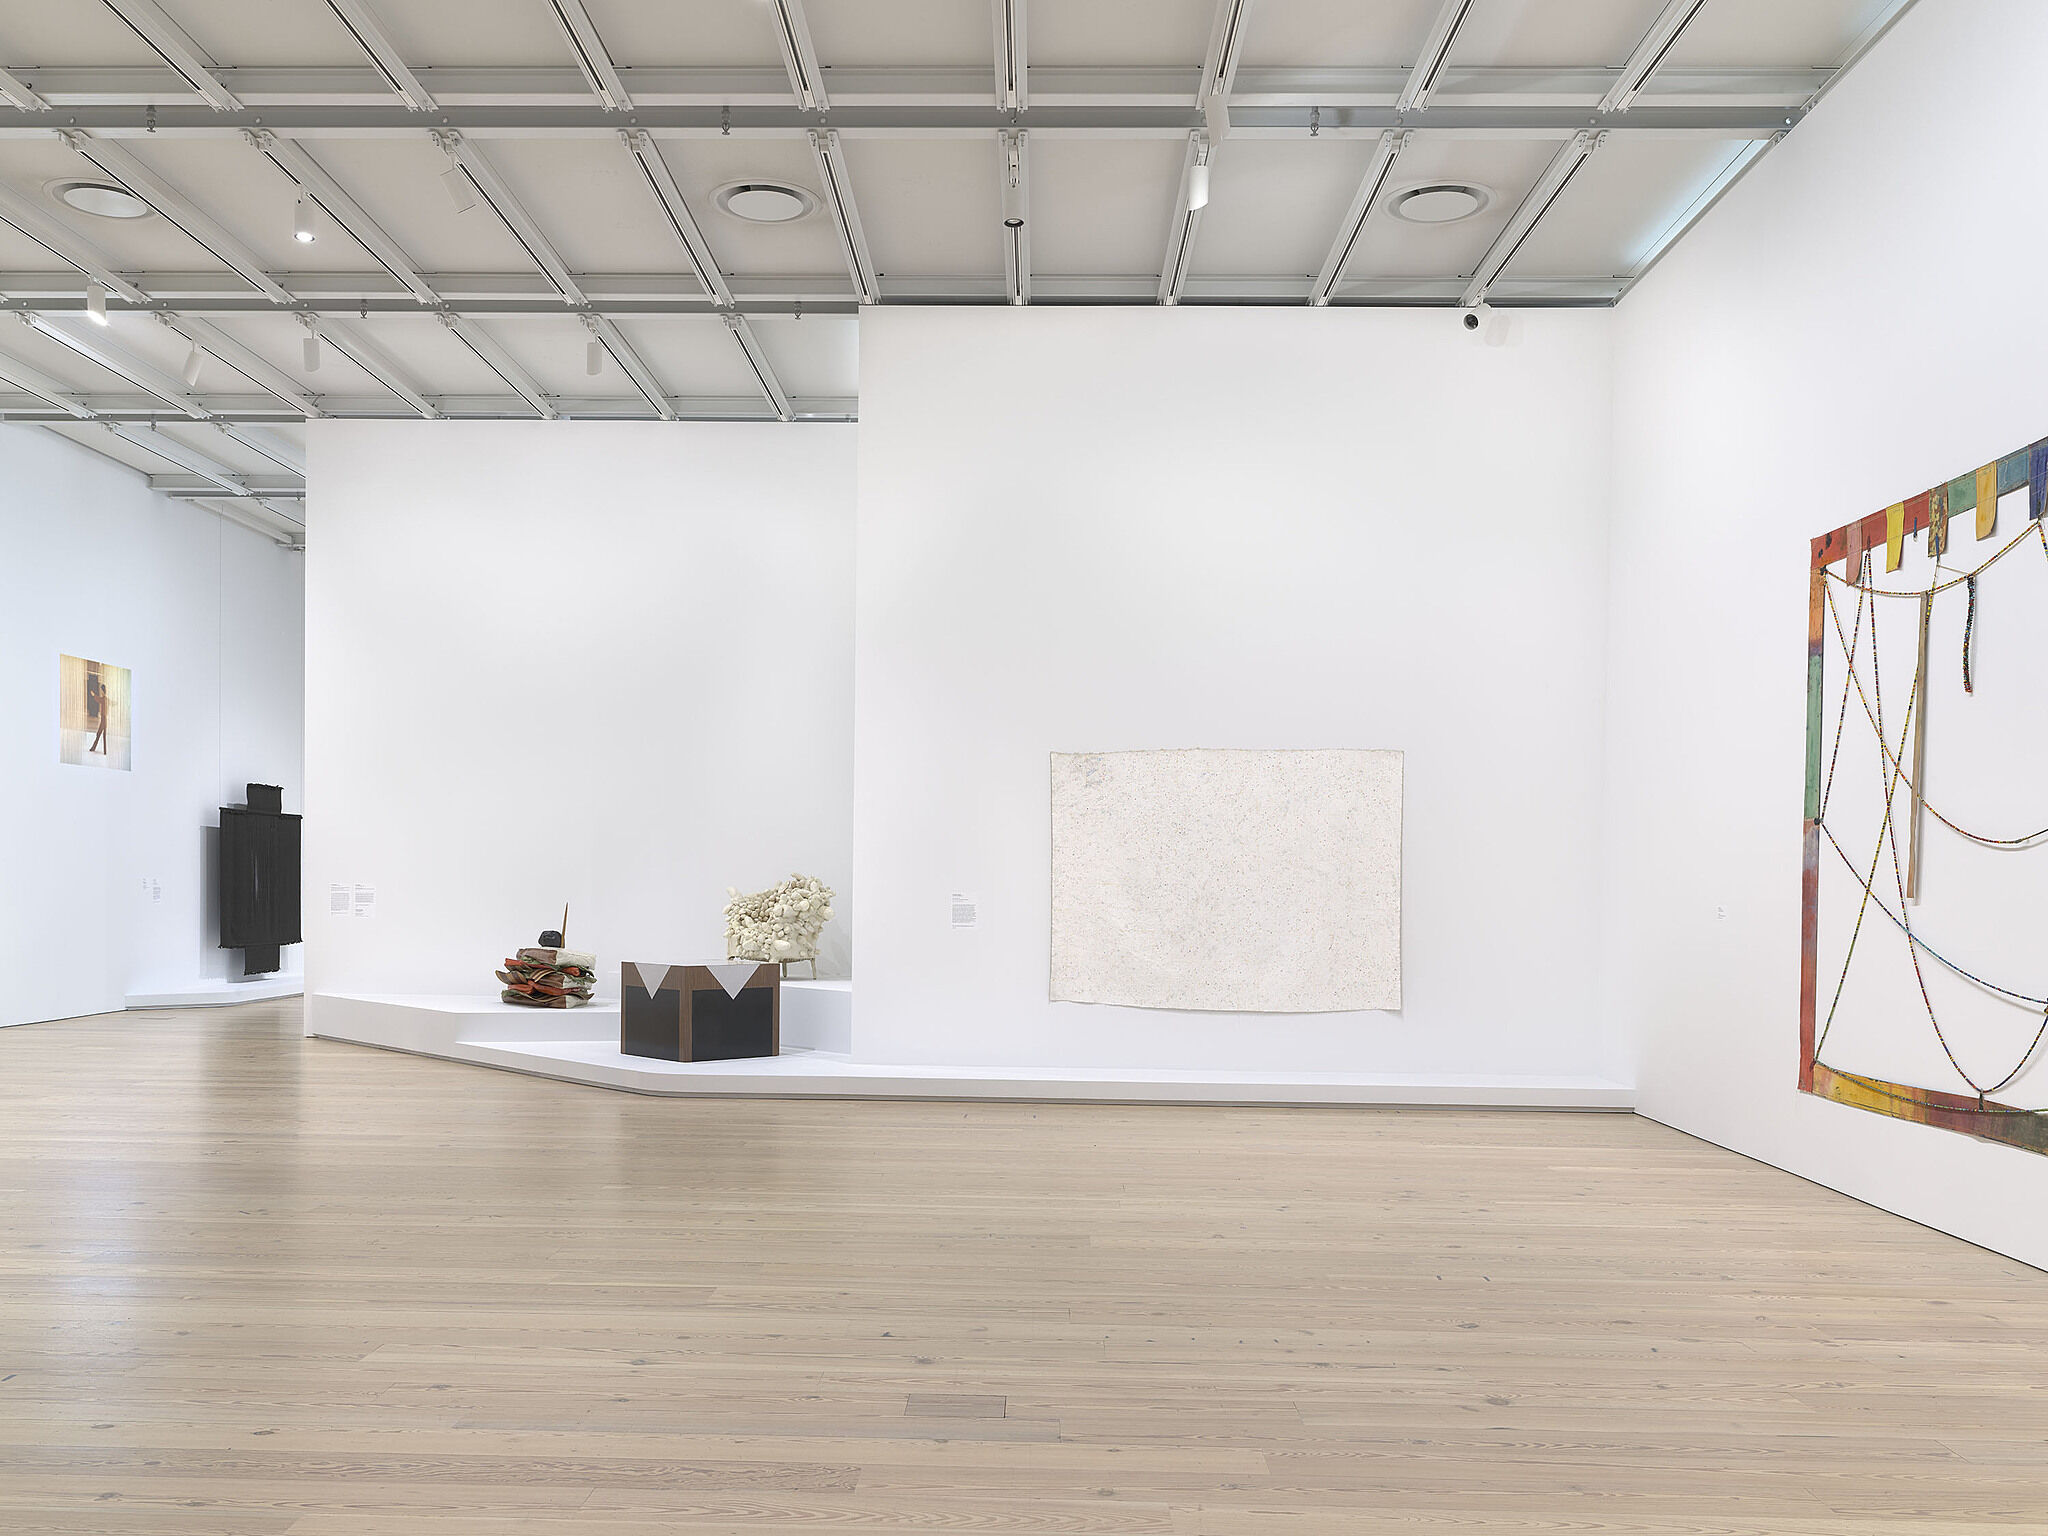 A photo of a Whitney gallery with various artworks.